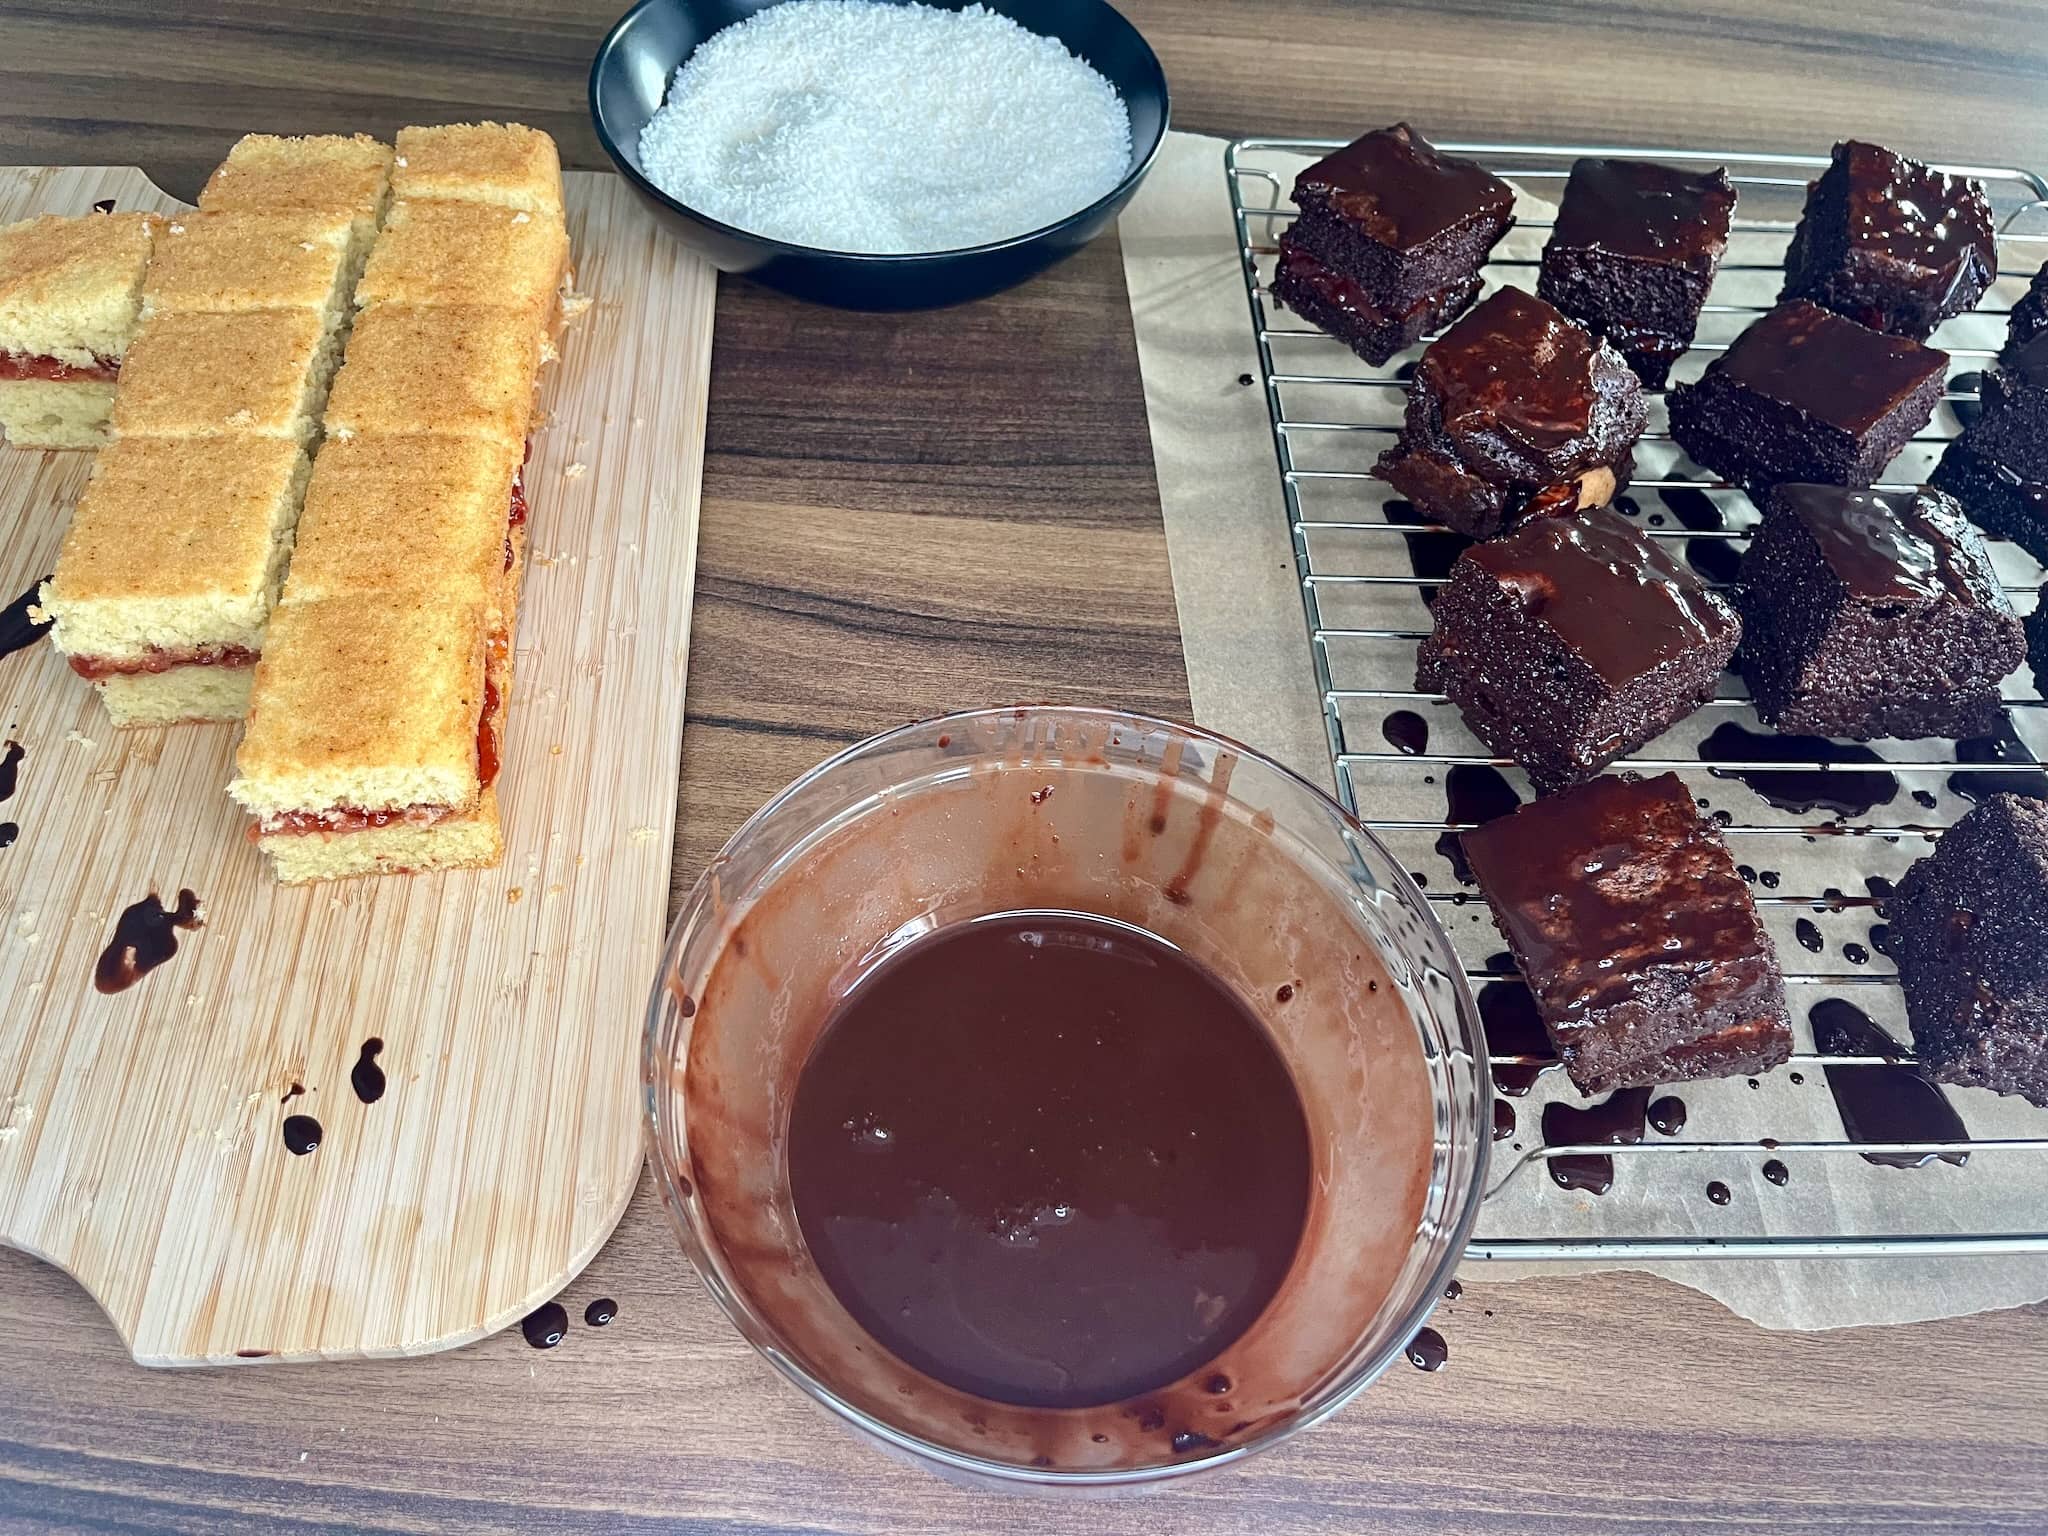 Process of coating sponge squares in a chocolate sauce for making Lamingtons